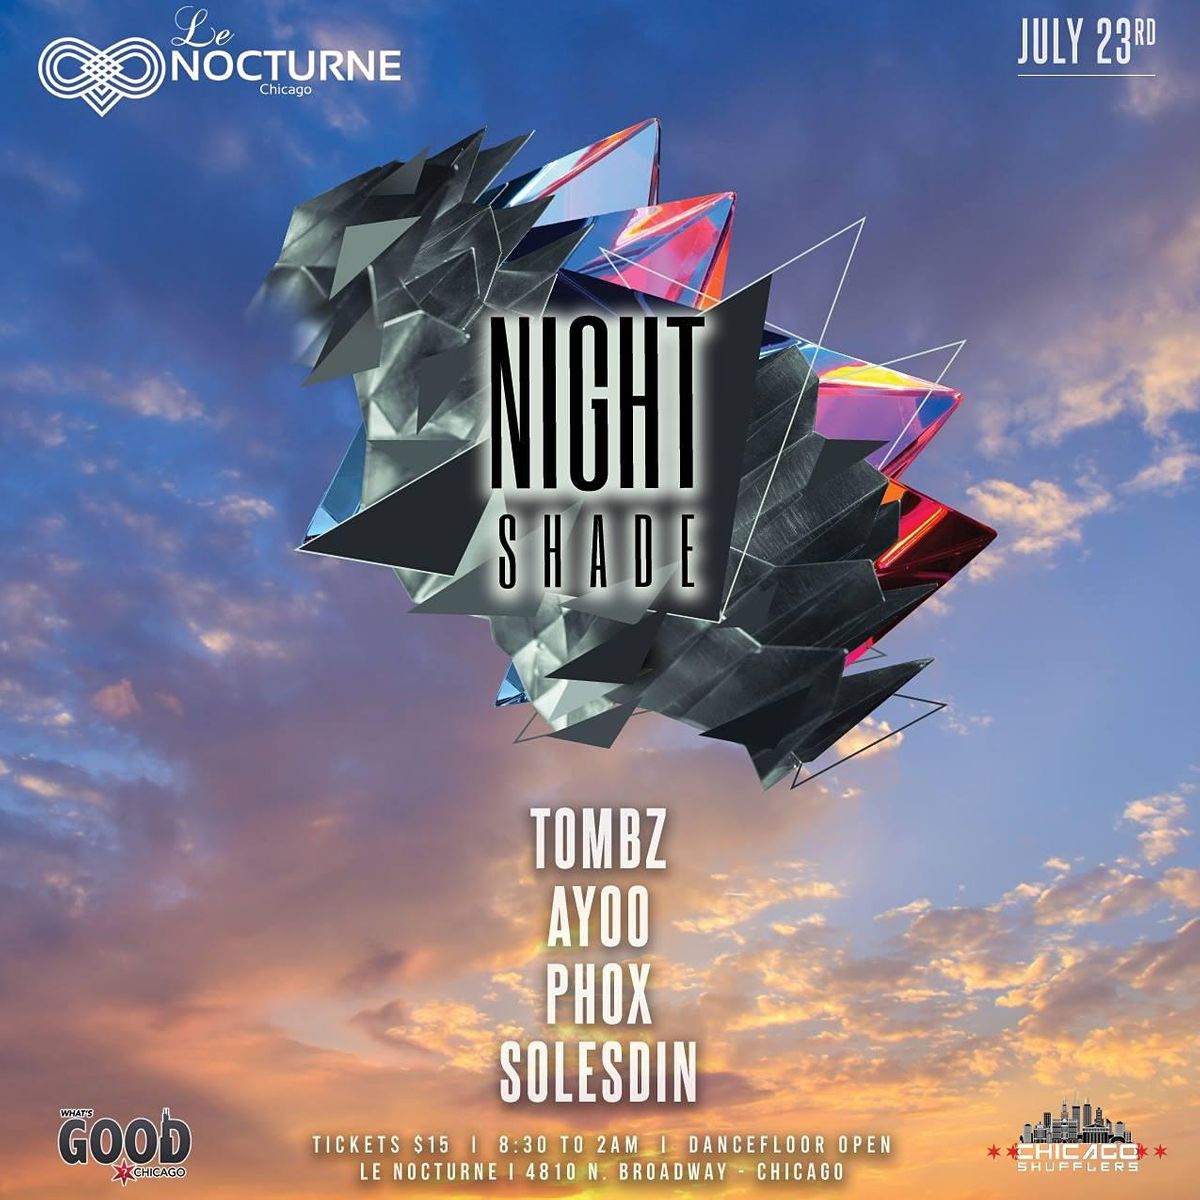 What's Good Chicago & EDM Chicago Presents "Night Shade" 7\/23